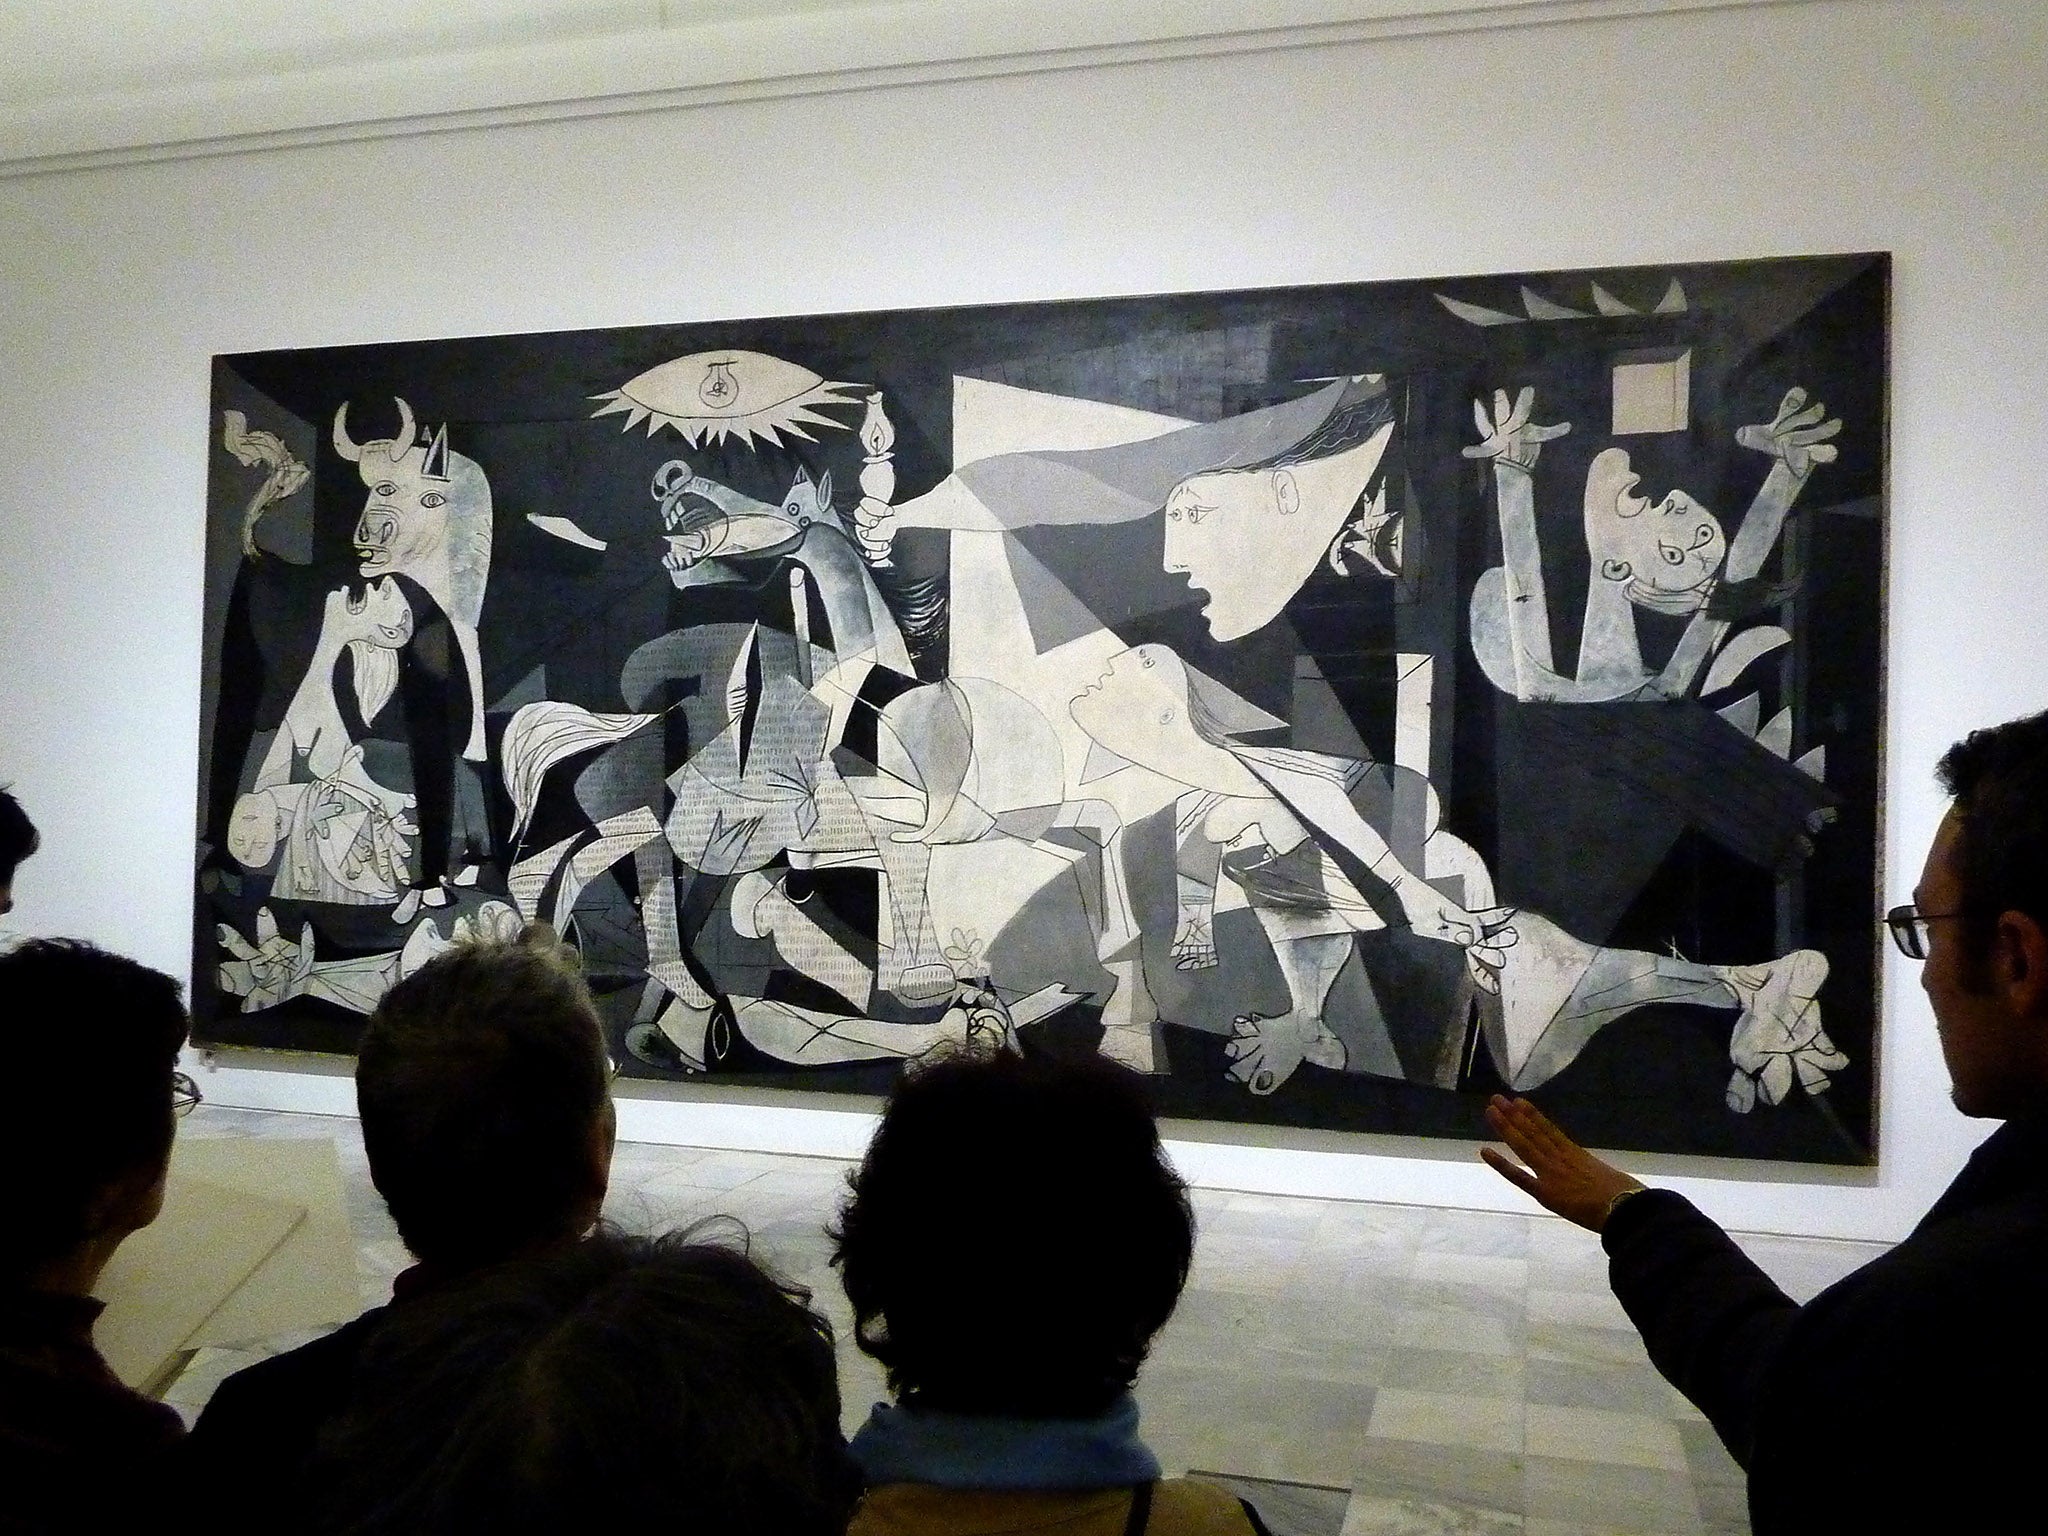 People look at the Guernica painting by Pablo Picasso at the Reina Sofia museum in Madrid on November 16, 2011.